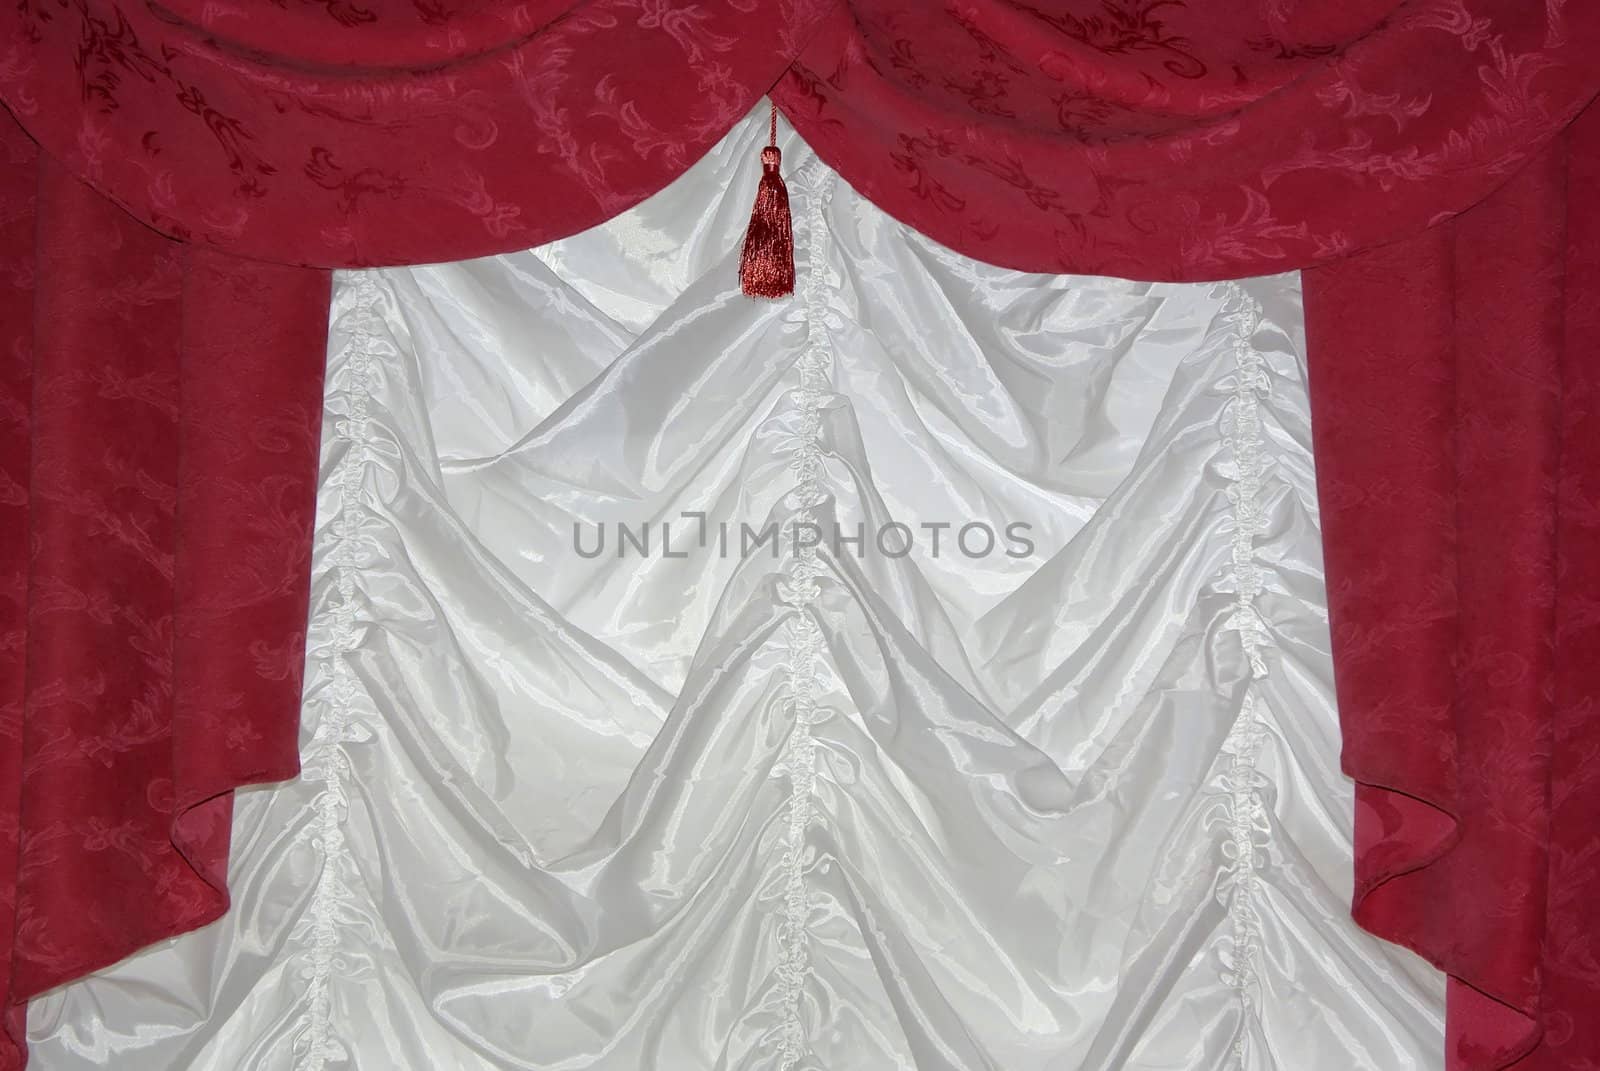 Red retro styled curtain on white background